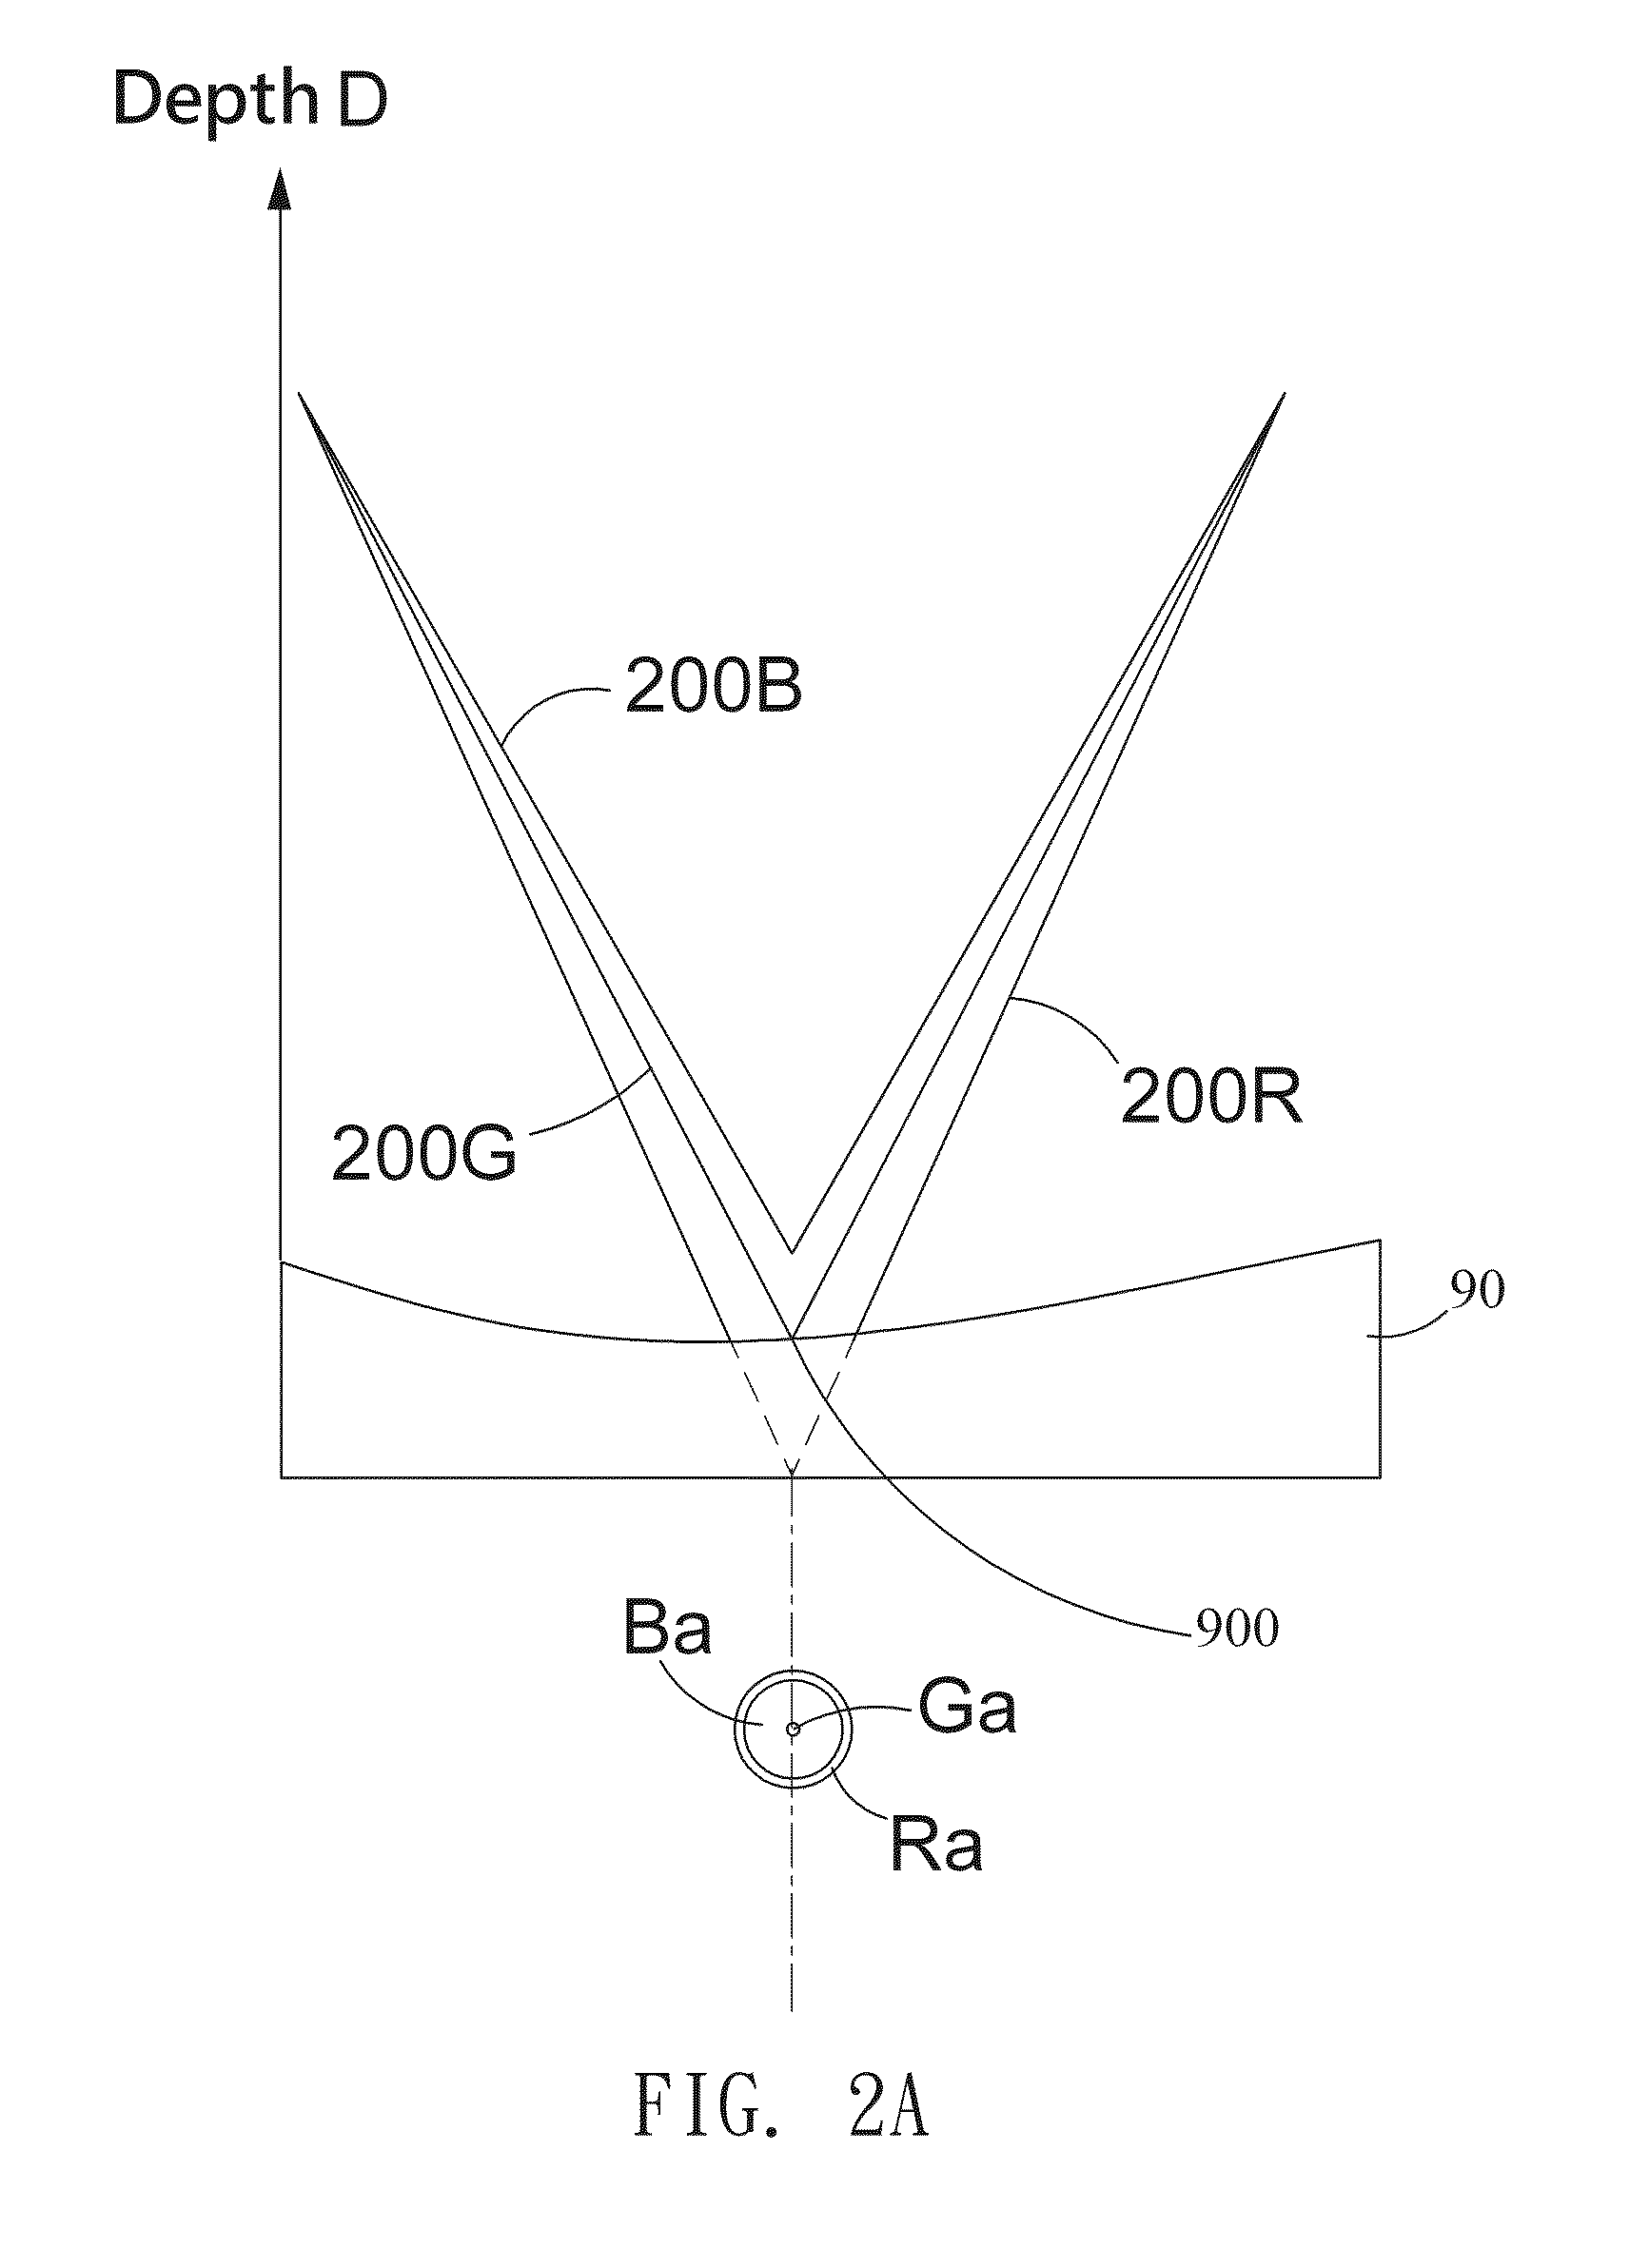 Differential filtering chromatic confocal microscopic system